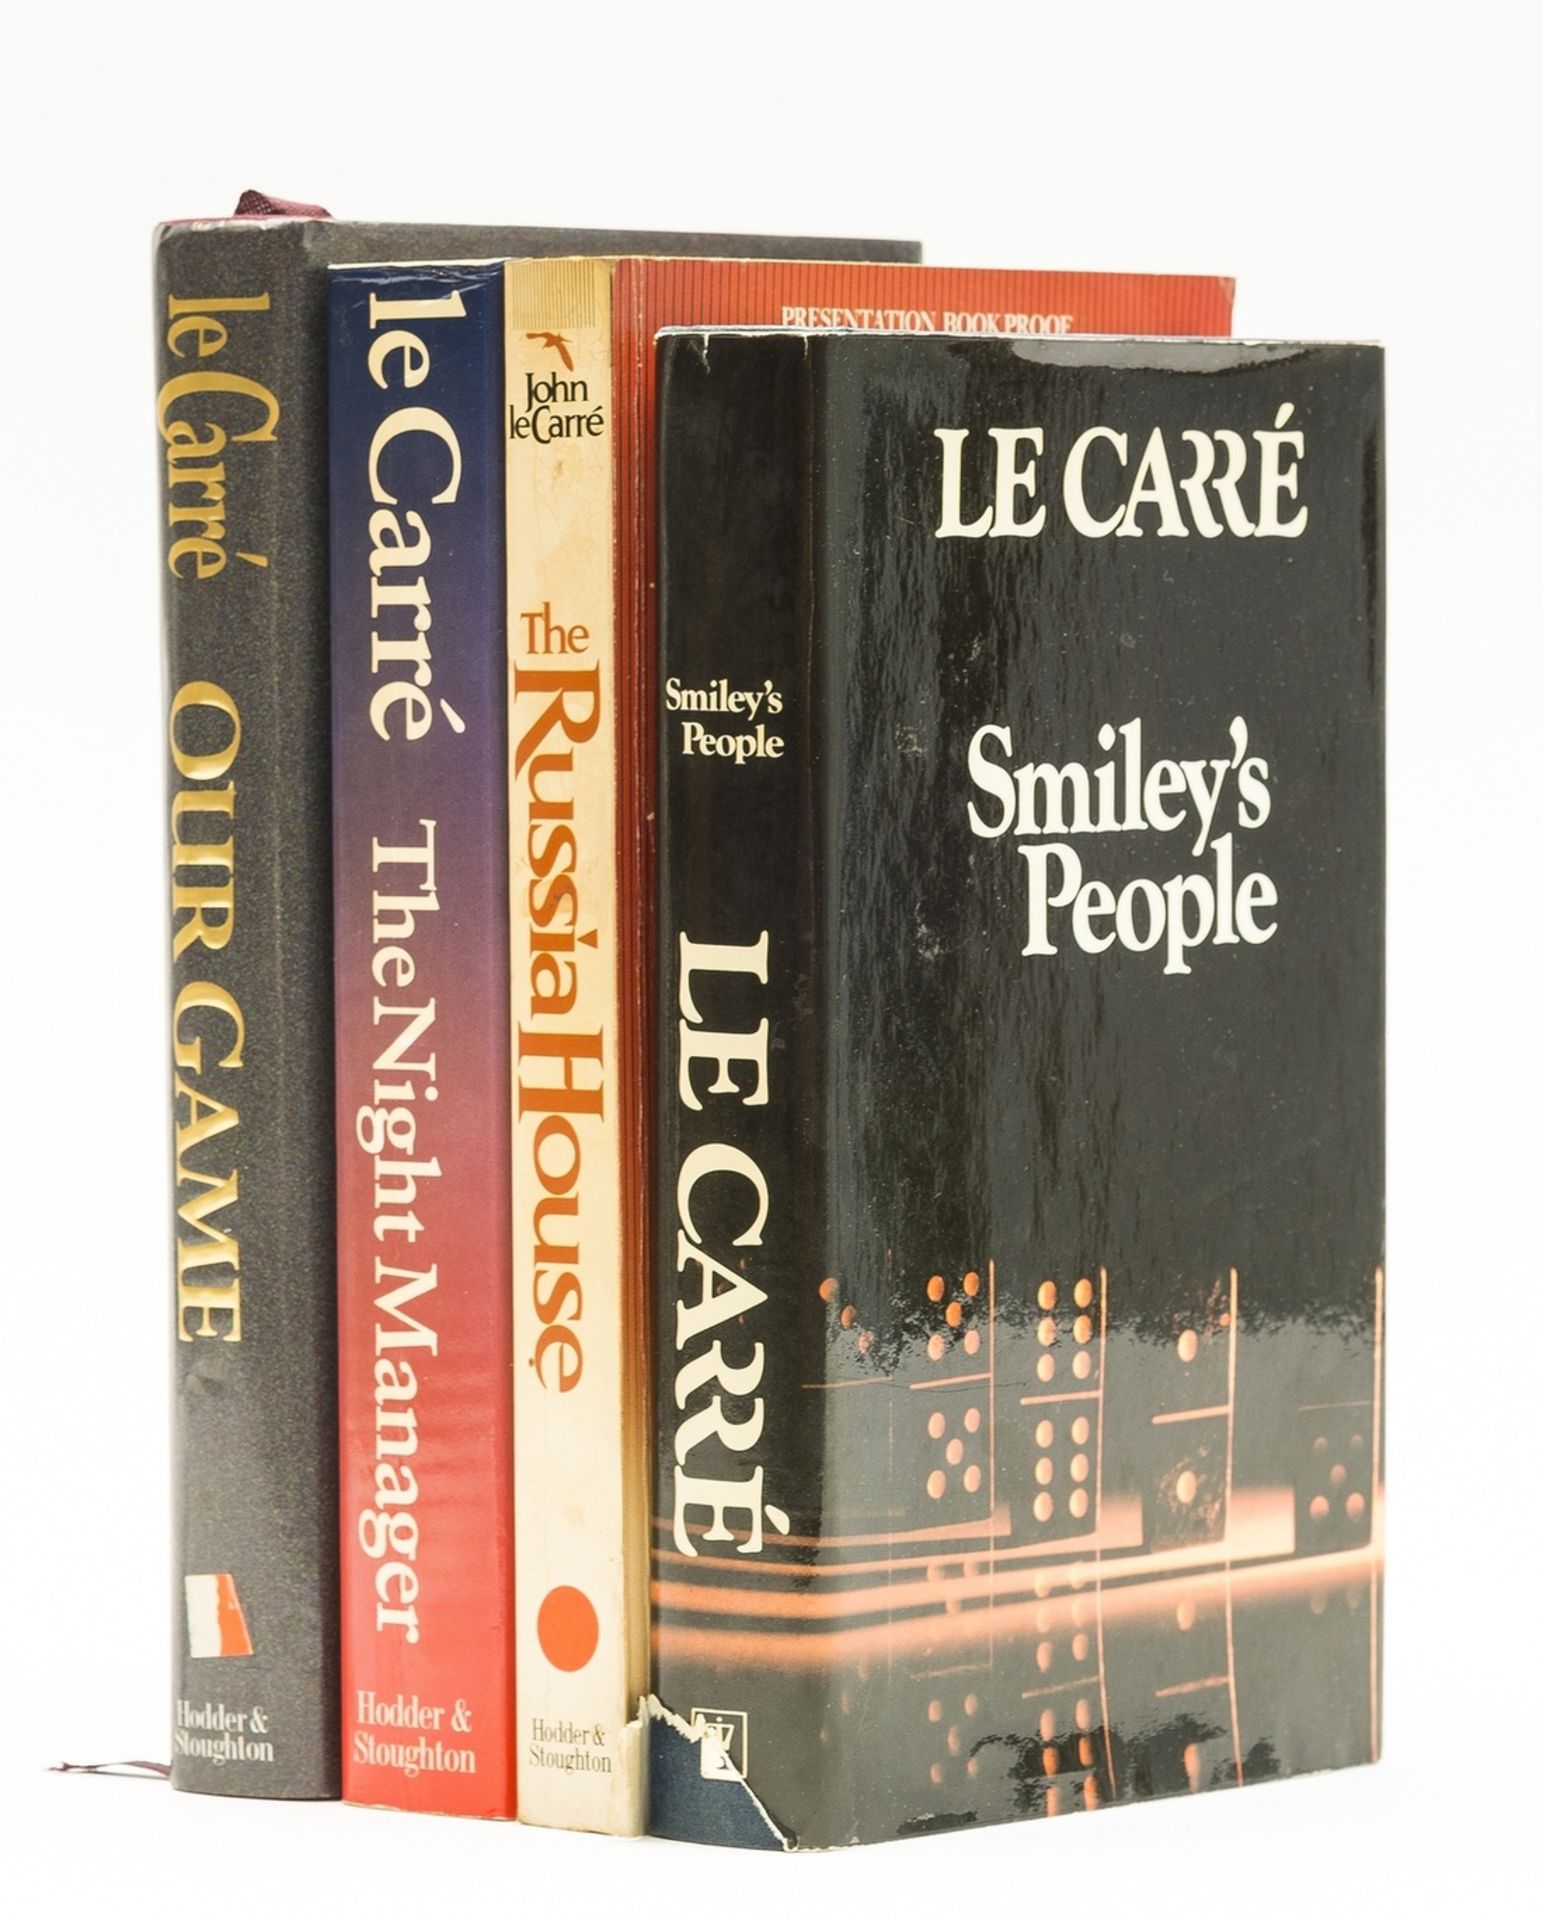 Le Carré (John) Smiley's People, first edition, signed by the author, 1980; and 3 others, some …